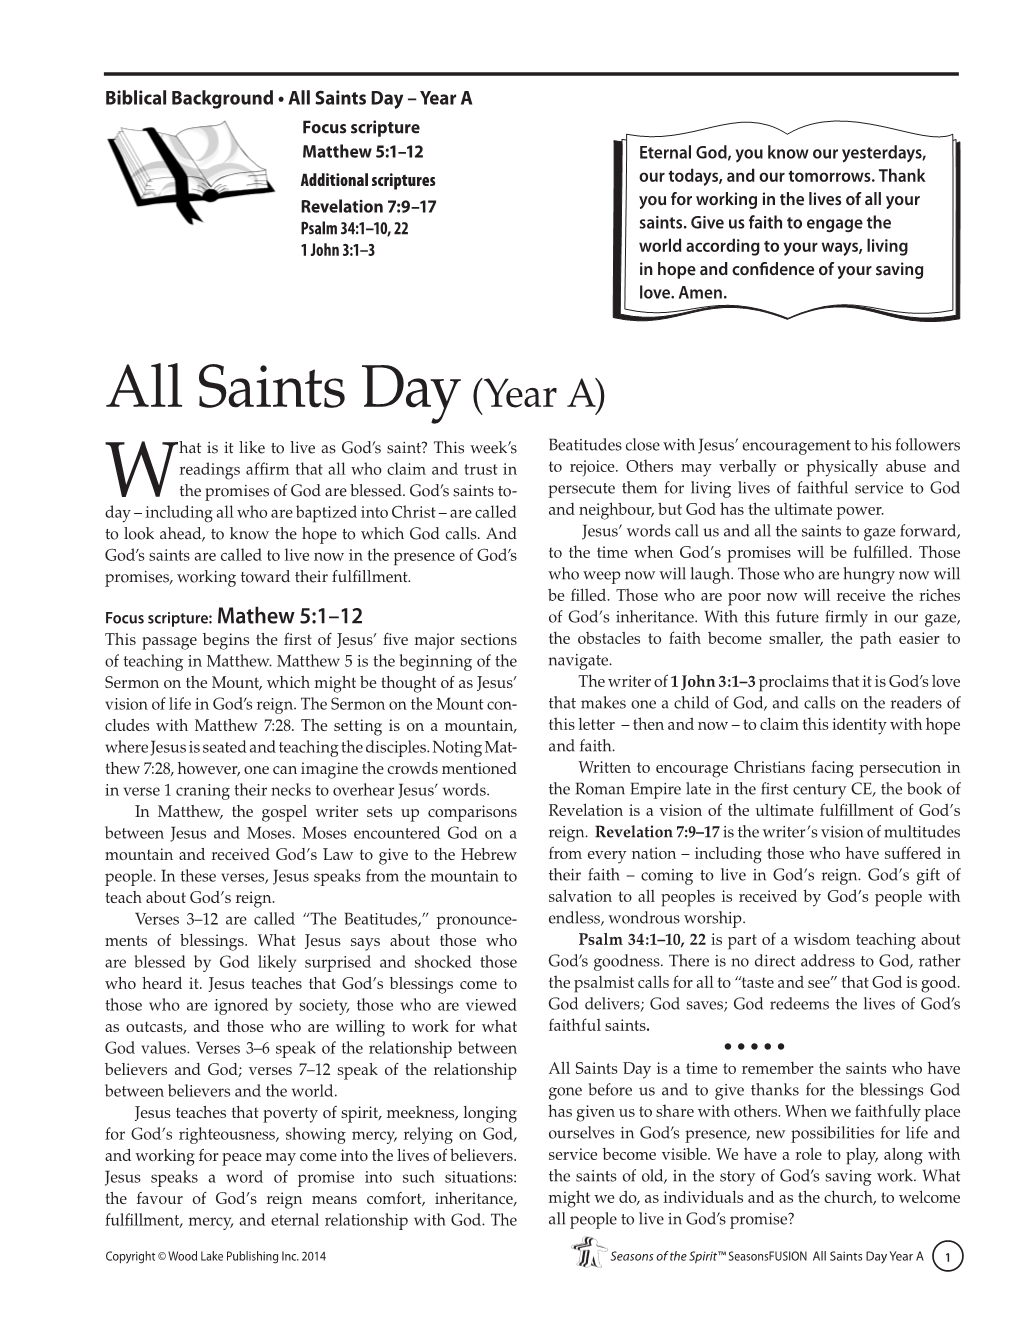 All Saints Day(Year A)